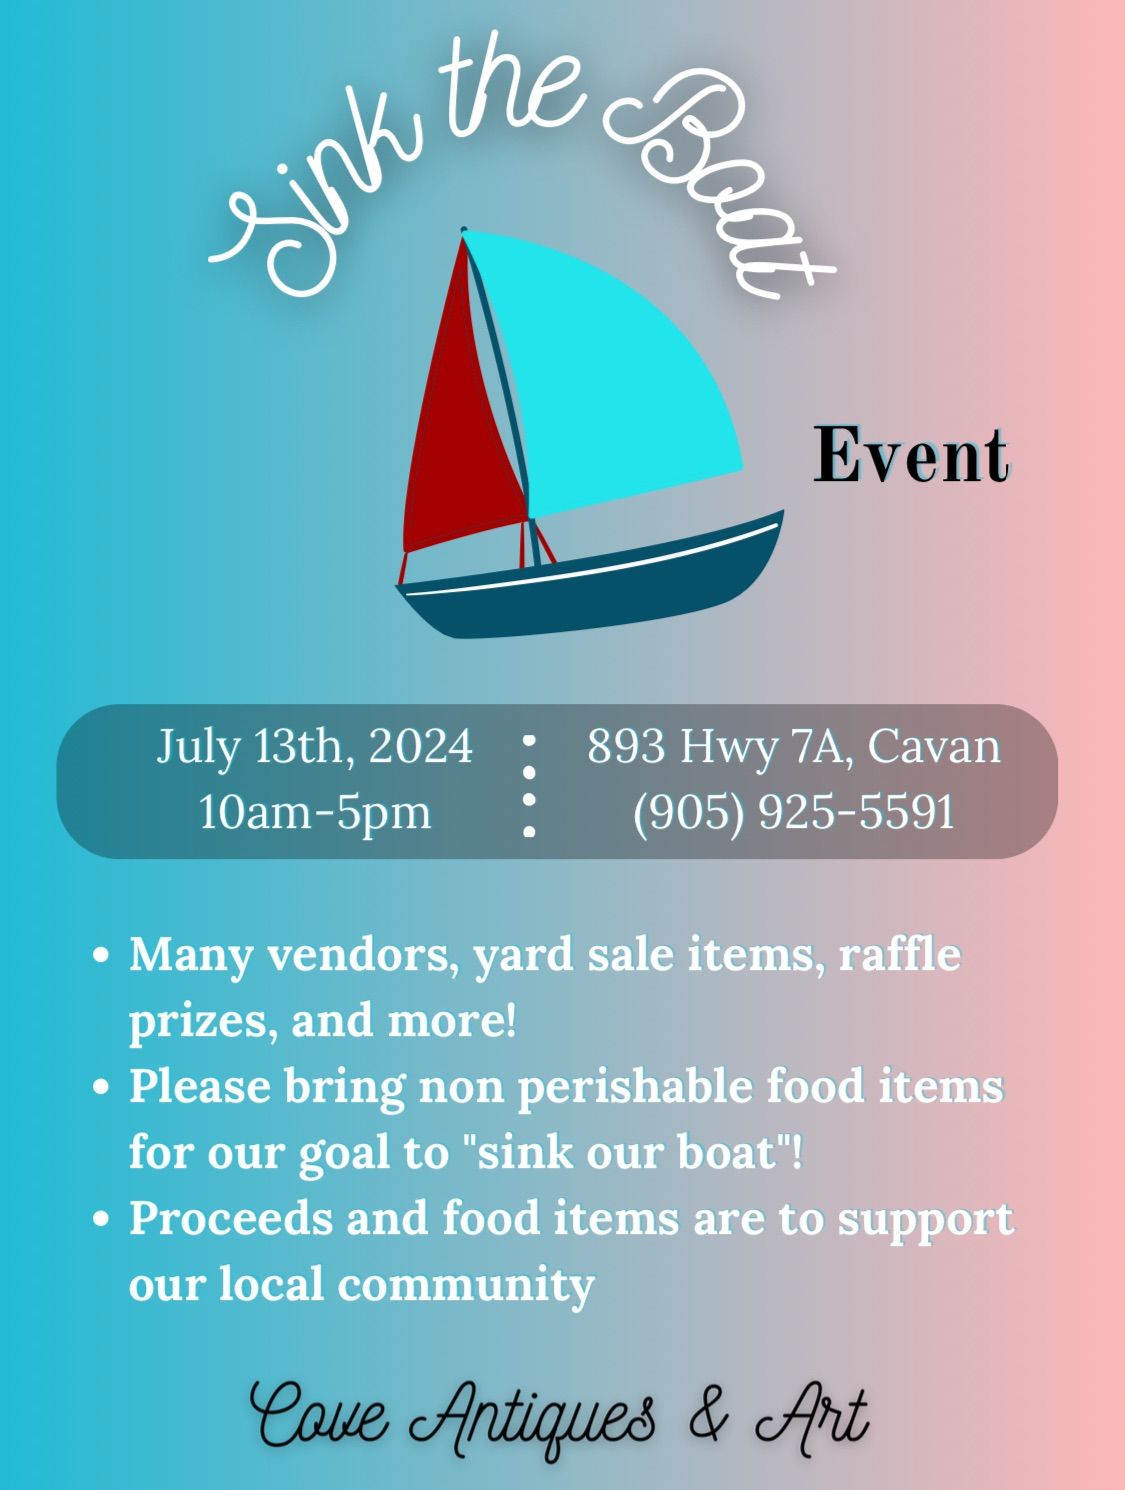 Our BIG Sink the Boat Fundraiser Event!